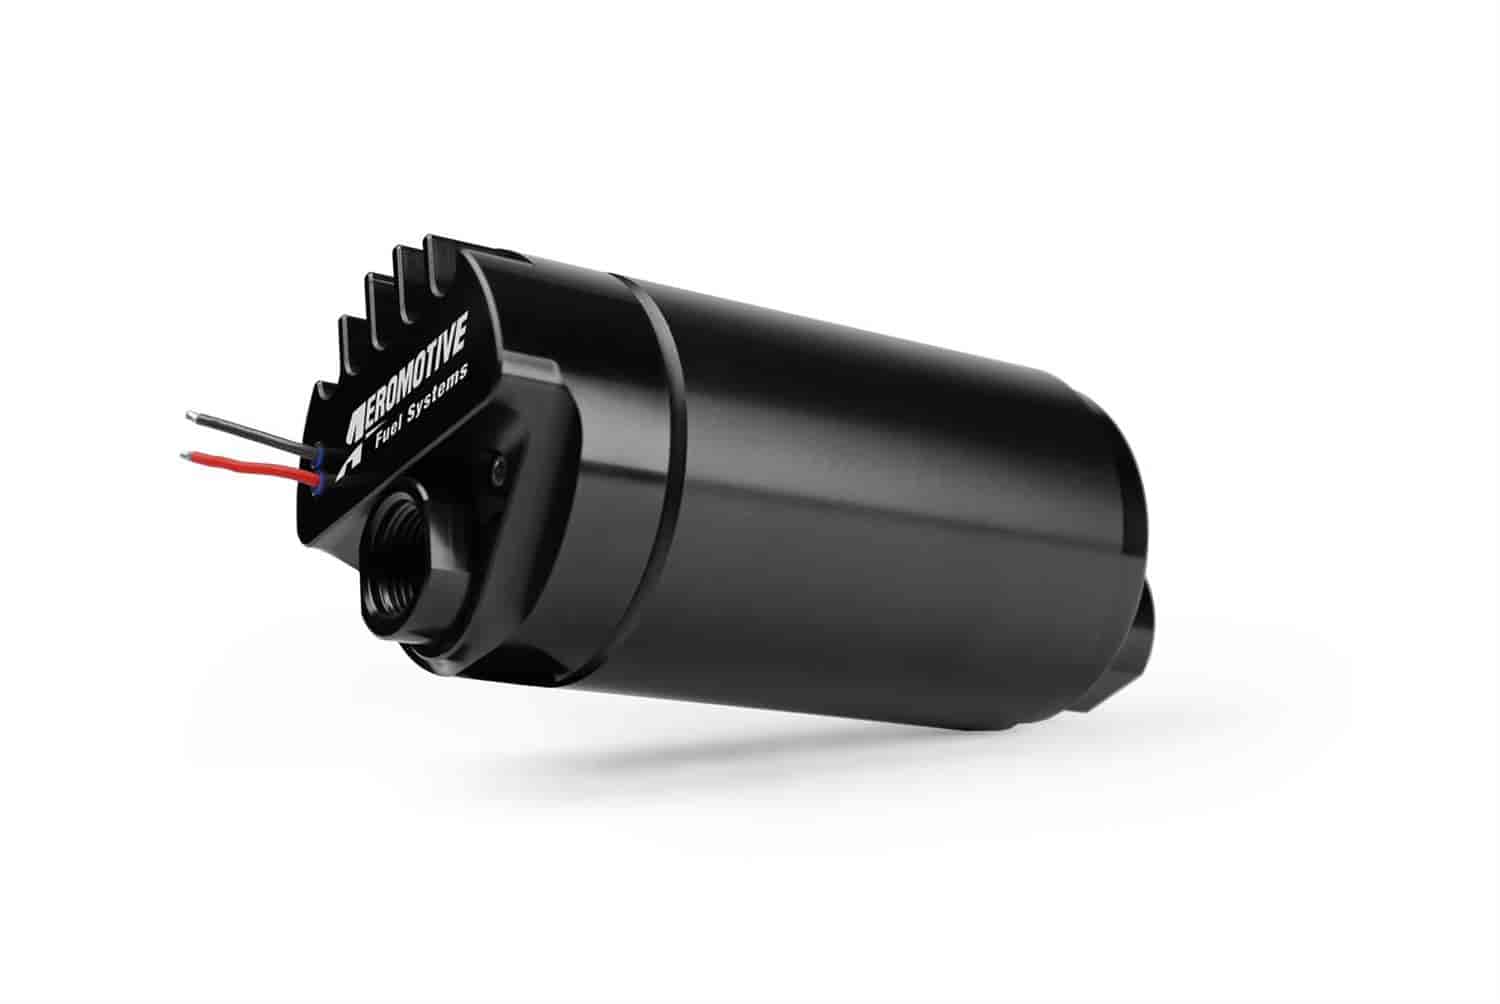 A1000 External Variable Speed Fuel Pump Round Housing, Brushless Motor